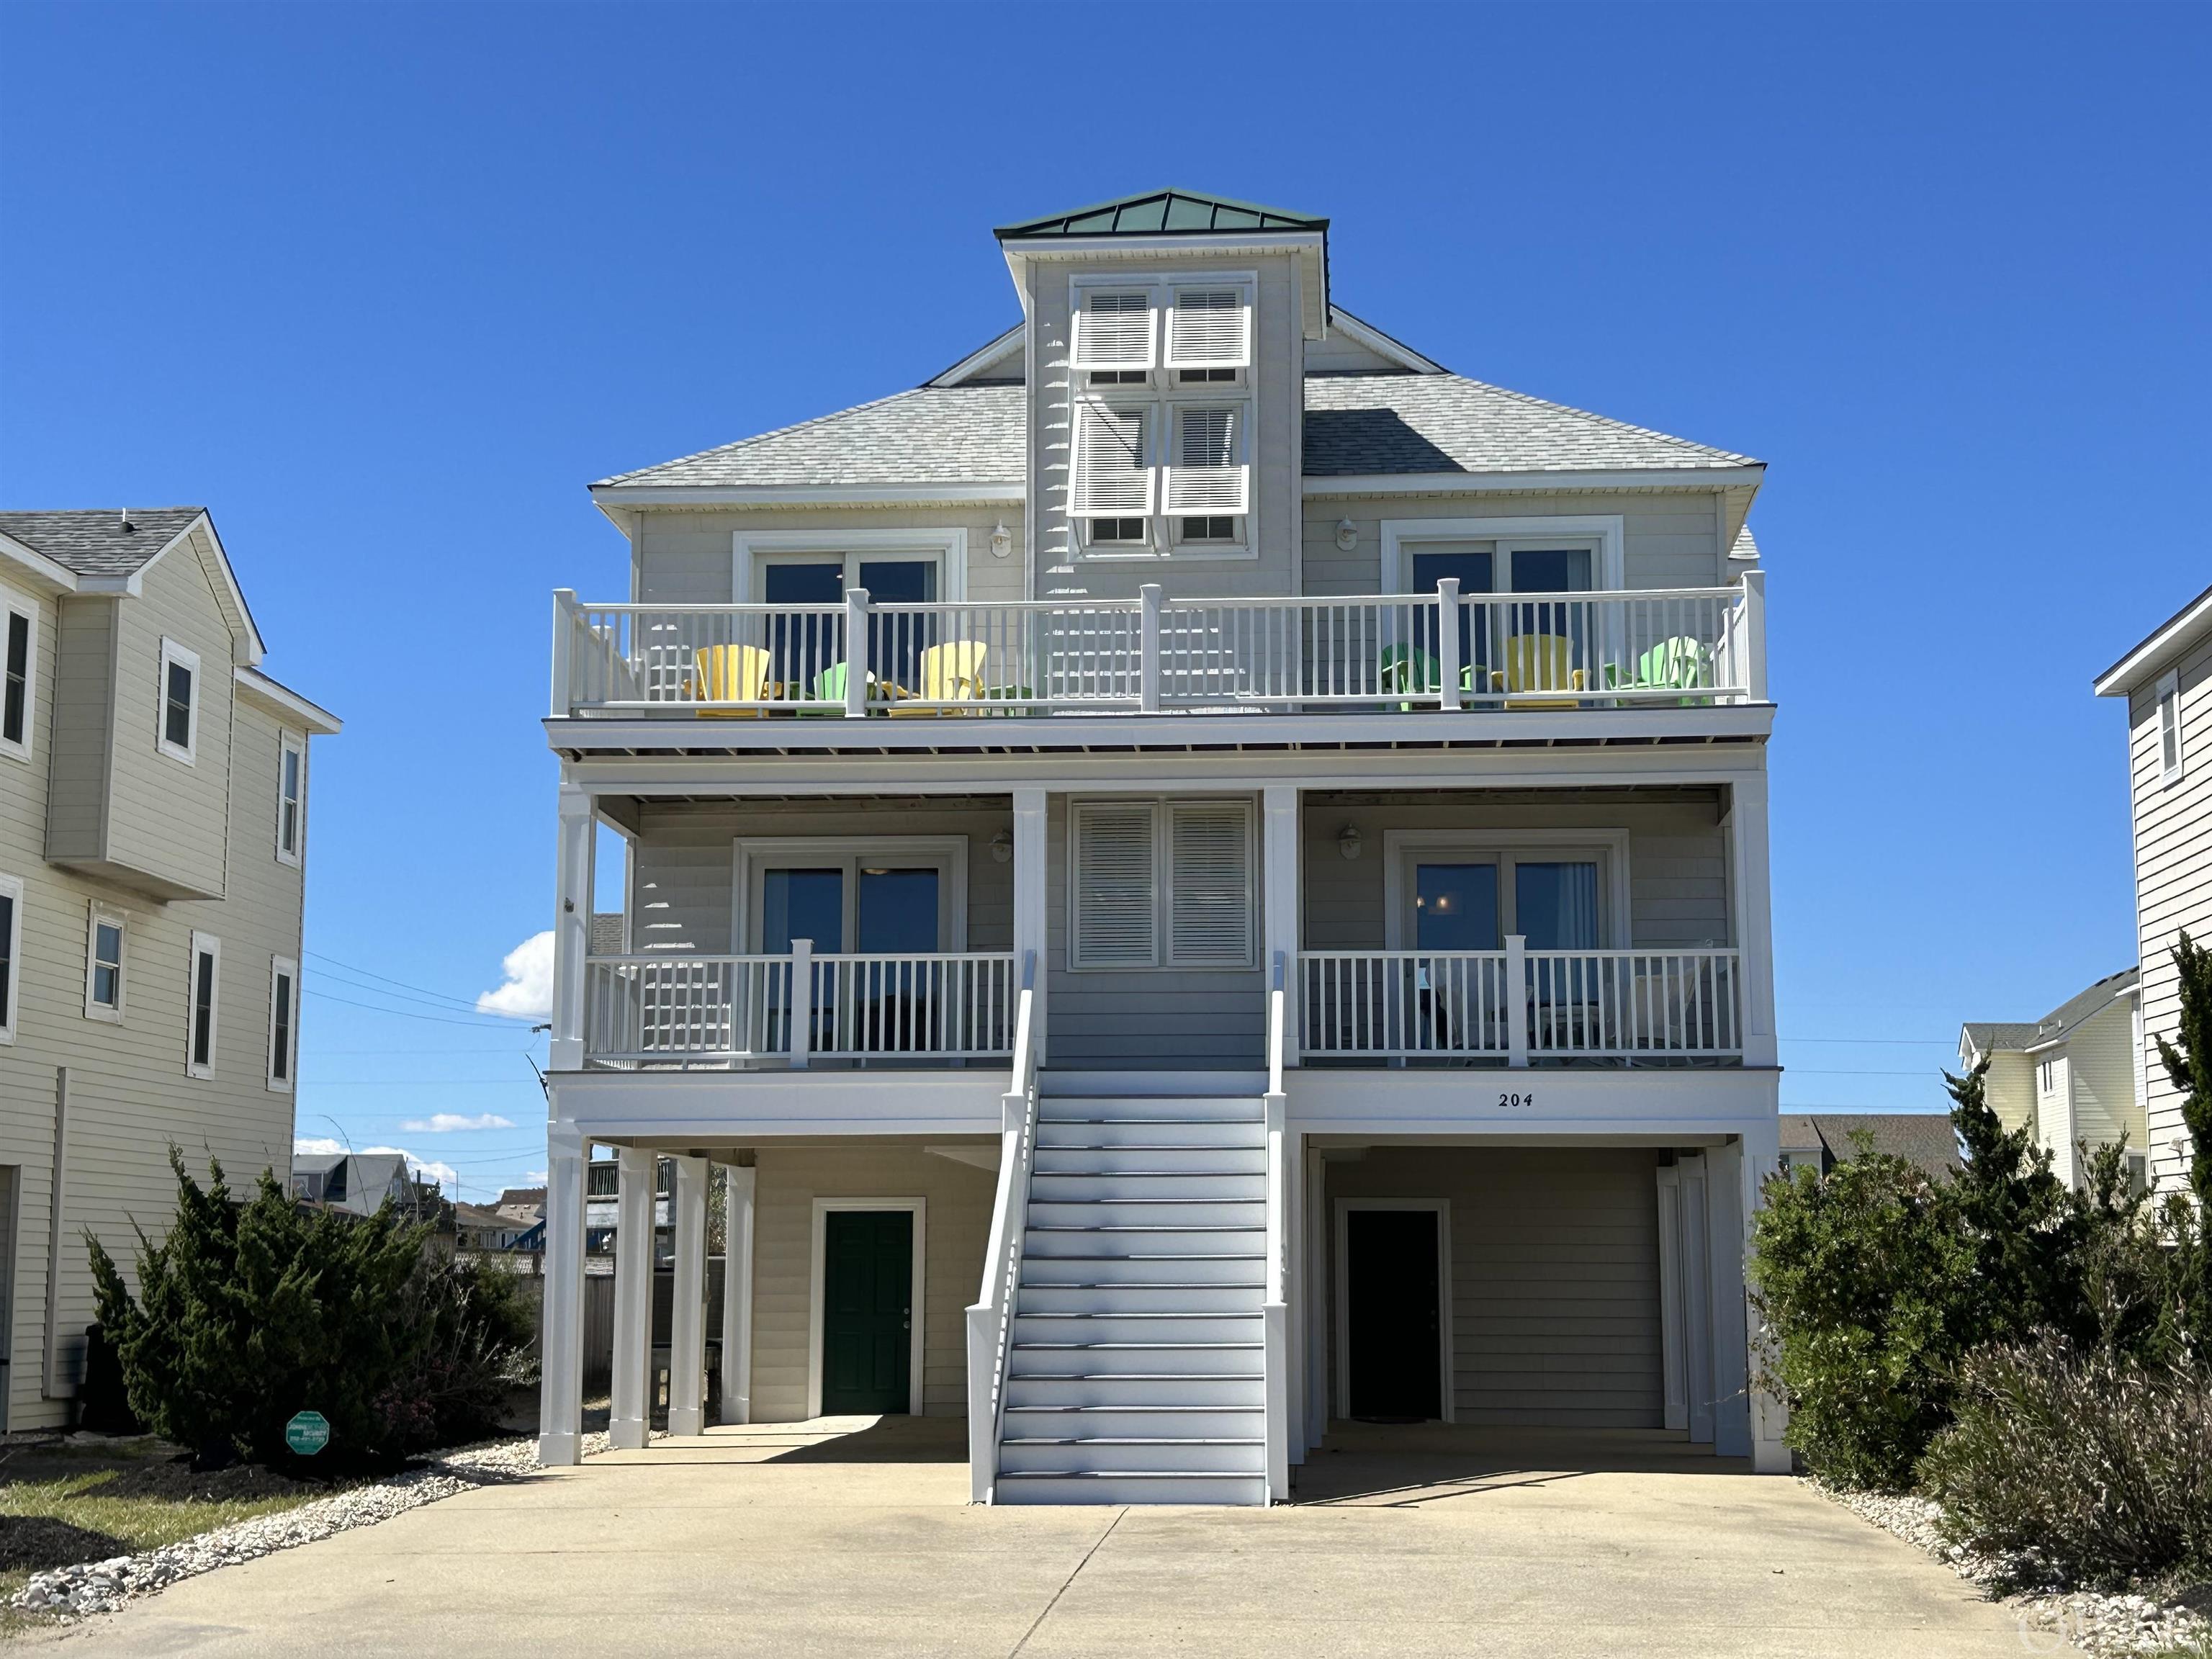 Whether Hosting a Crowd or Escaping to the Beach for Some Quiet Time, This Beach House Will Serve You Well. Diagonally Across the Street from Access to One of the Best, Most Stable Natural Beaches on the Outer Banks. Meticulous Renovations and Updates Have Kept This One-Owner Home in Prime Condition with Aesthetic Improvements. The Cabana, with Its Outdoor Kitchen, Is Featured in the Landscaped, Fenced Pool Area with Plenty of Space for Sun and Fun. Reclaimed Heart Pine from an 1800s Home in Virginia on the Top Floor. Caribbean Heart Pine on the Stairs and Mid-Level. Top Level Living Spaces Include a Shipswatch/Office, a Designer Kitchen with Double Ovens, Two-Drawer Dishwasher, Wine Cooler and More, an Inviting Gathering Room with Gas (Propane) Fireplace and Dining Space for All Plus the Primary En Suite with a True Walk-In Cedar Closet. Sliding Glass Doors for Ocean Views and Access to the Sundeck. Mid-Level Living Spaces Include the More Formal Foyer/Sitting Room, Three Additional Bedrooms, Each an En Suite and One with Access to the Covered Deck, and the Convenient Full-Size Laundry in the Hallway. First Floor Living Spaces Are the Perfect Complement to the Outdoor Spaces with Wet Bar, Countertop Ice Maker, Beverage Refrigerator, Full Bath and Lounging Spaces for TV, Games and Conversation. The Cabana Is Equipped with Gas (Propane) Grill, Beverage Refrigerator, Bar Sink and Ample Cabinetry.